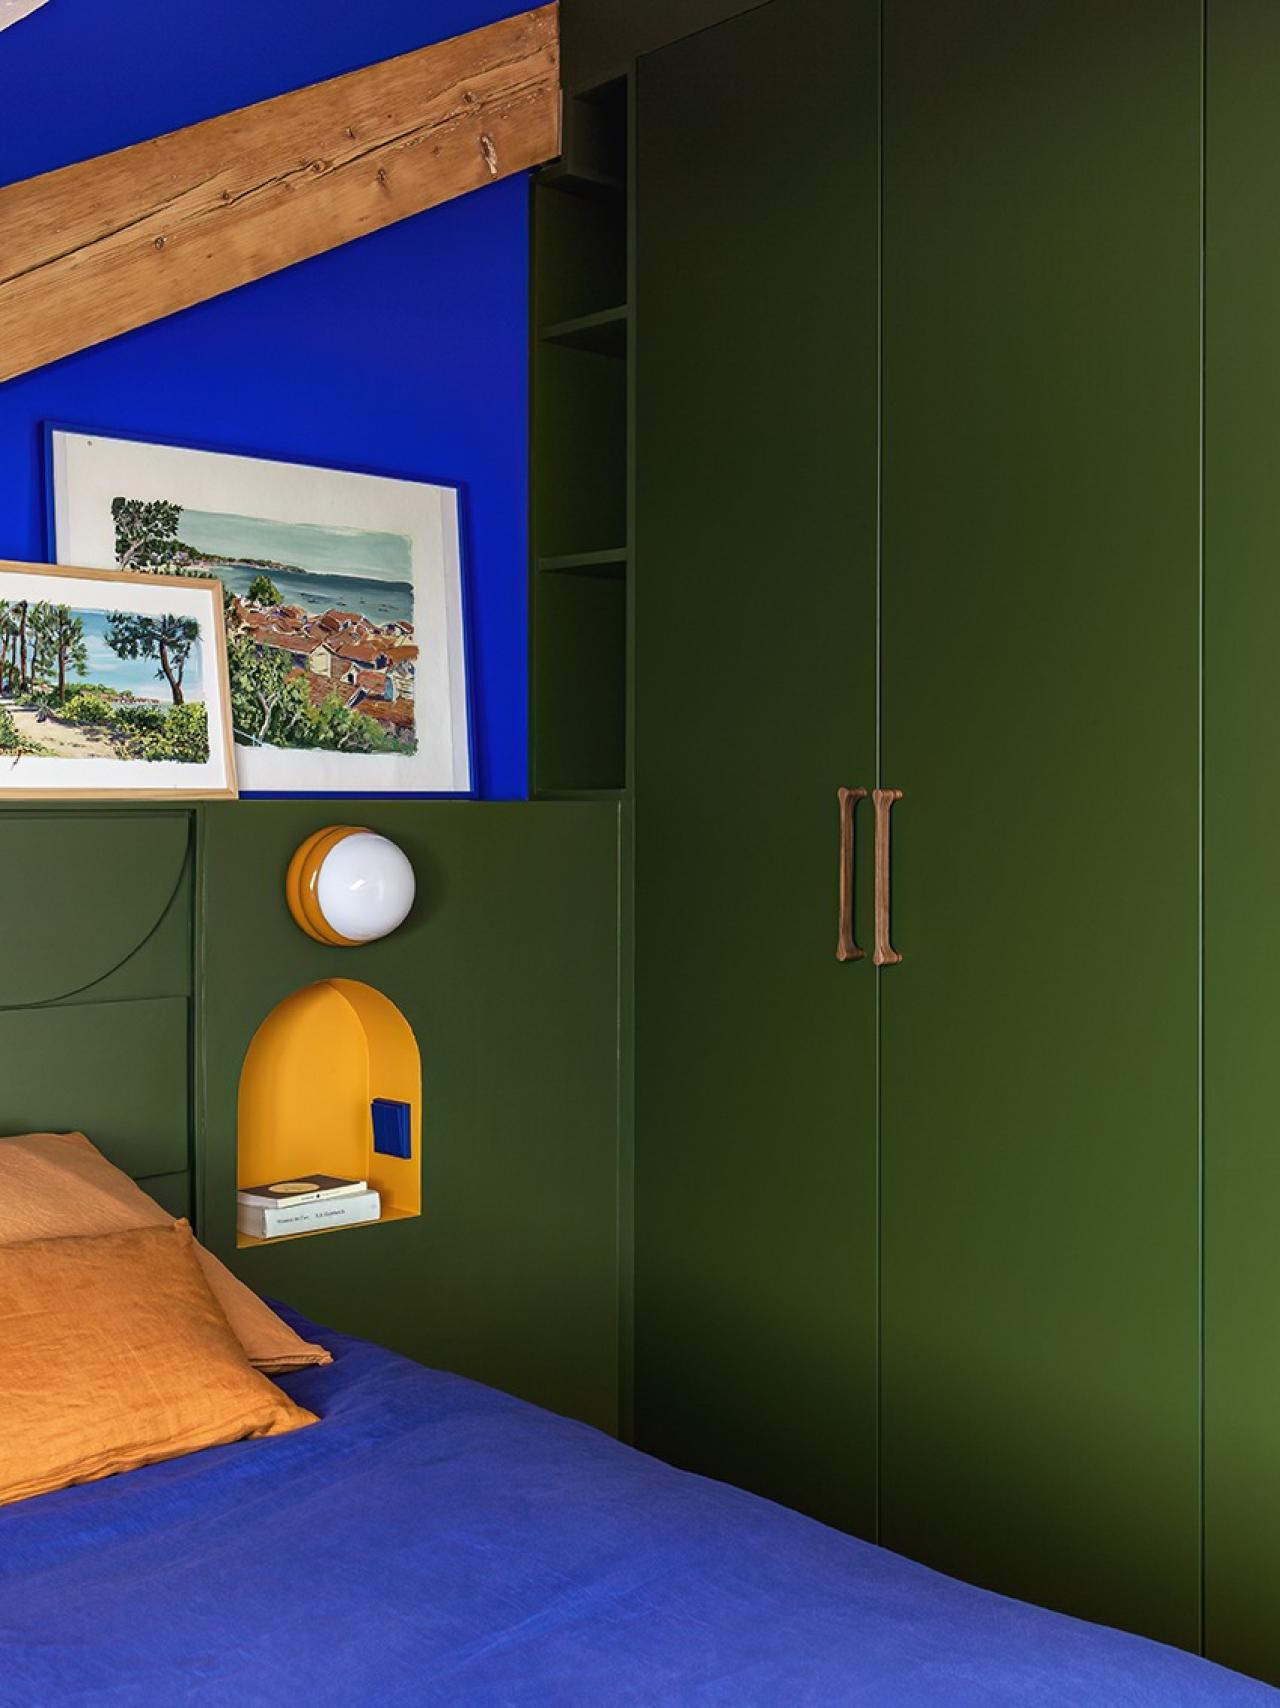 Olive-coloured built-in wardrobe, headboard with niches in Klein blue and Mustard yellow